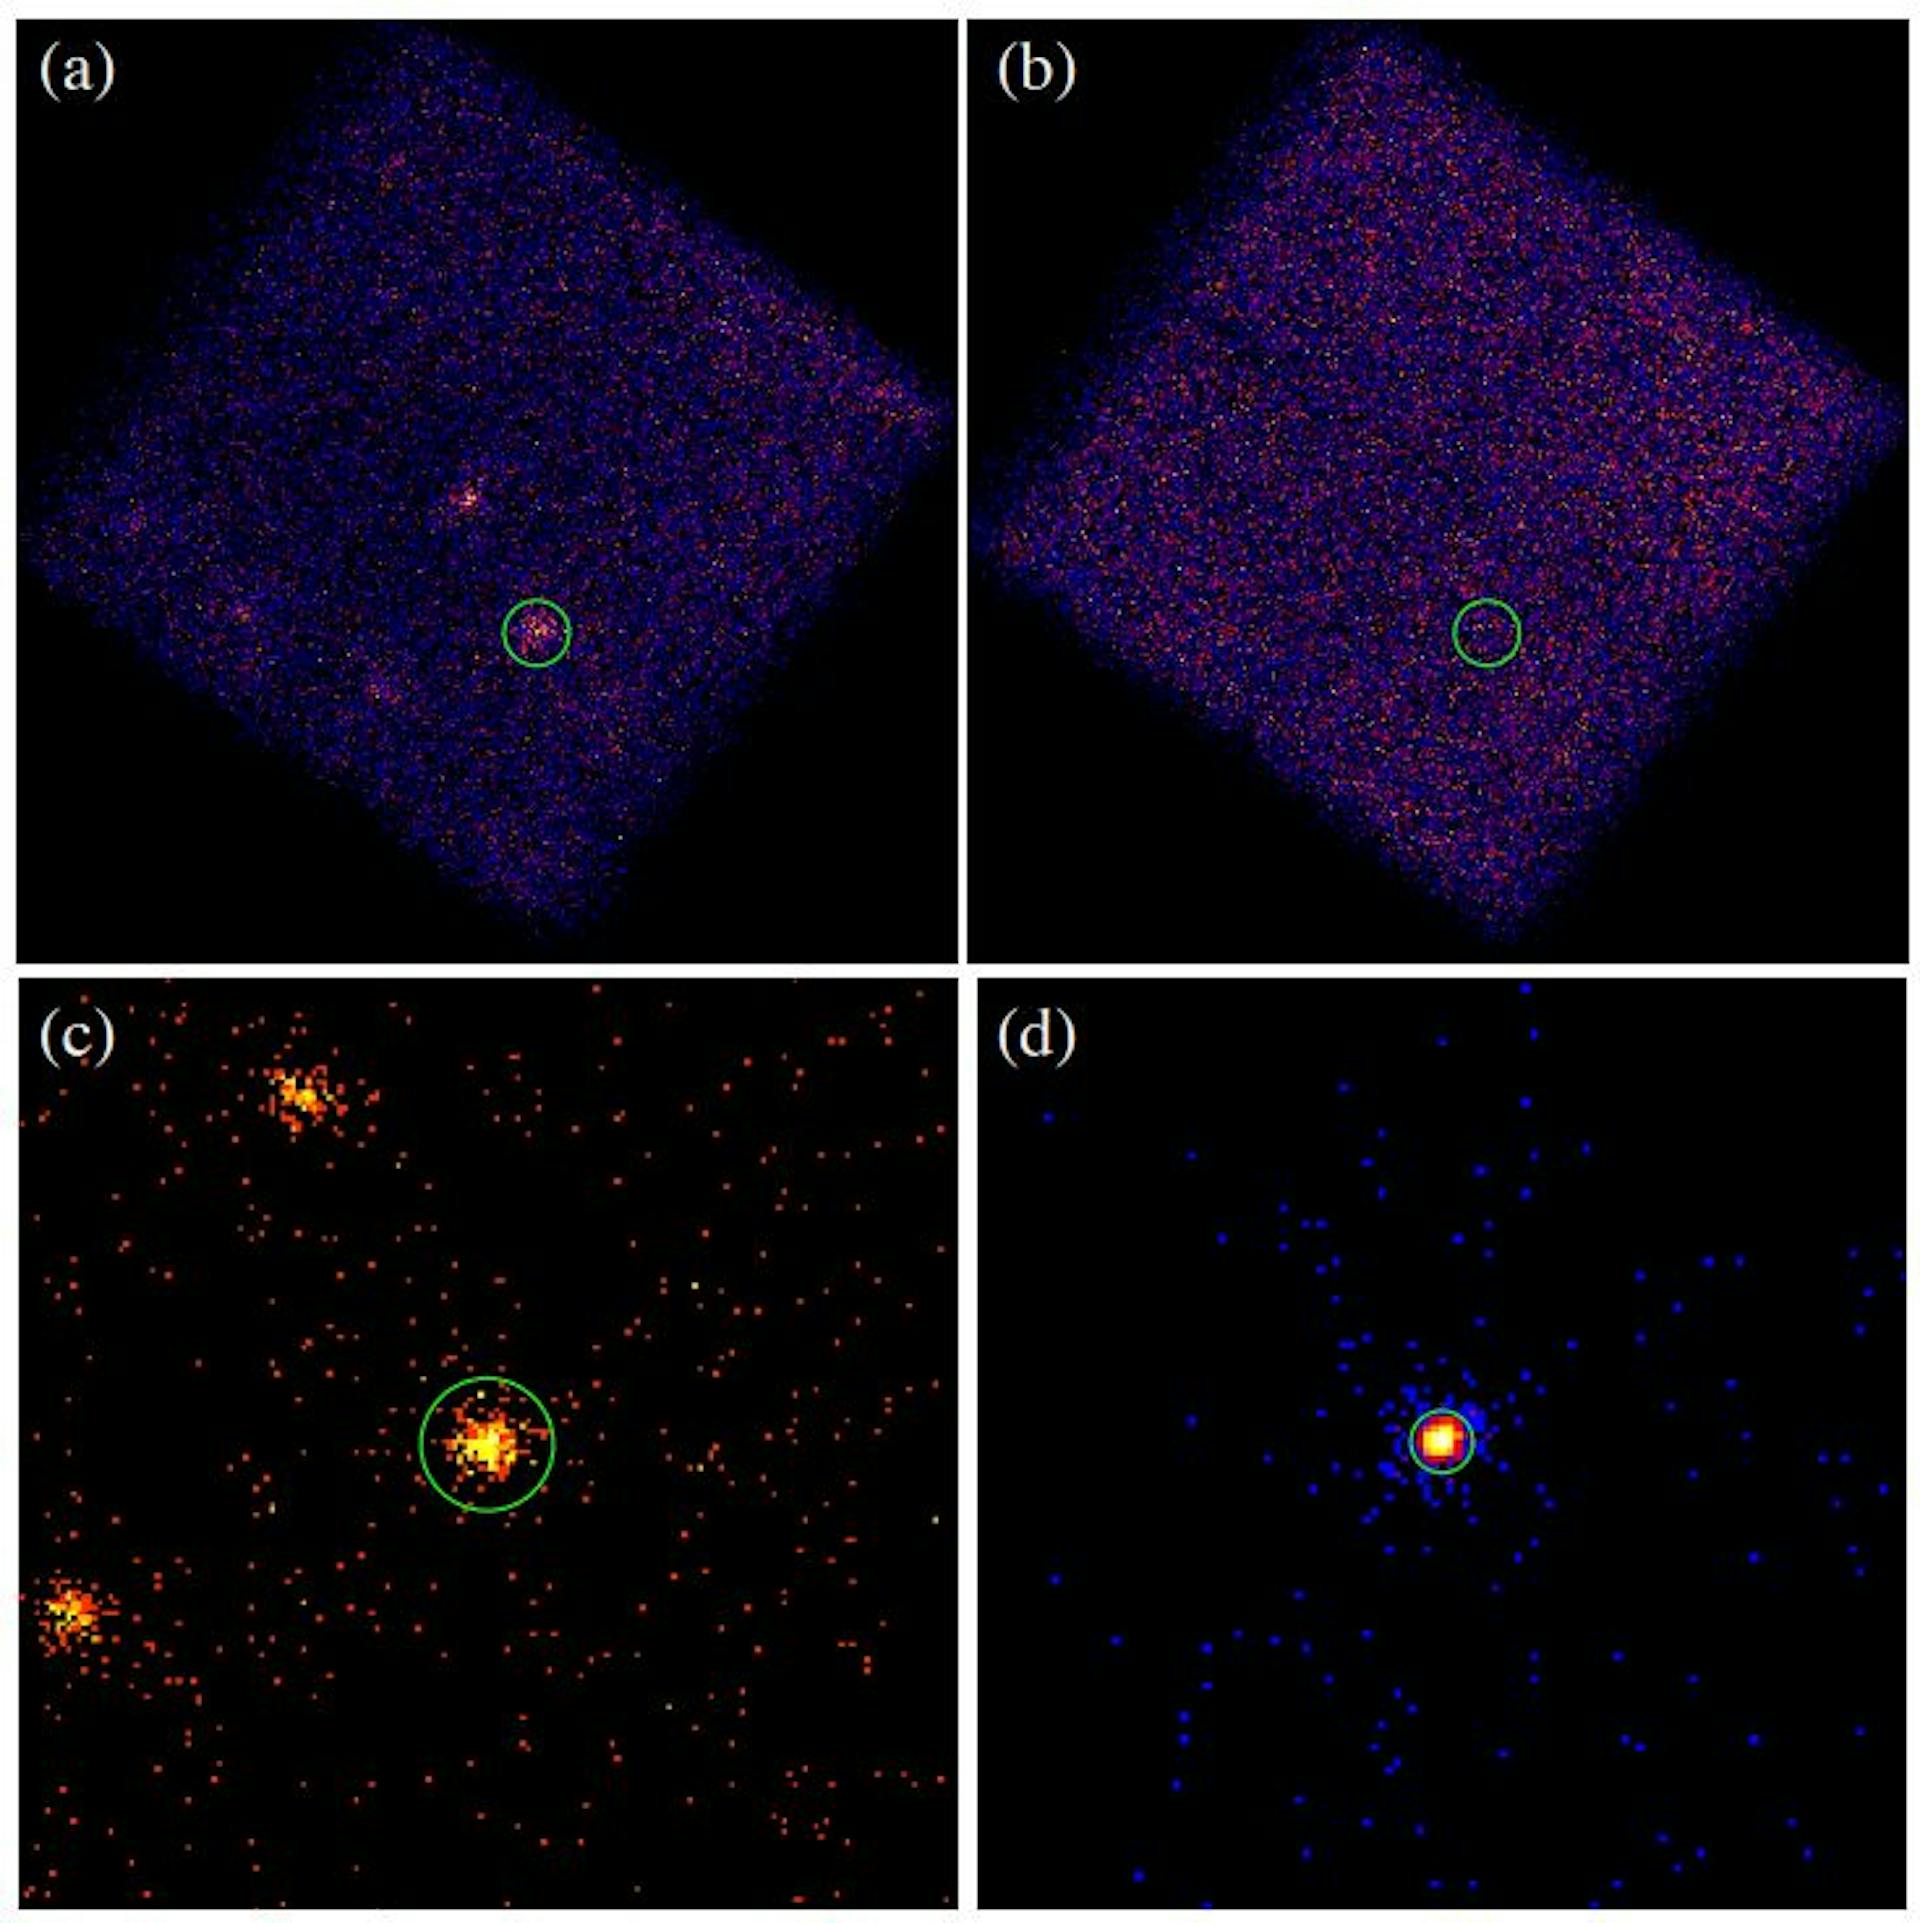 Figure 1. NuSTAR, Swift, and Chandra images of DQ Tau and its neighborhood. The color map, ranging from yellow to redto blue, indicates the intensity of X-rays with yellow and blue pixels representing more and less X-ray counts, respectively. Each figure panel has its own unique intensity scale. DQ Tau source extraction regions are marked by the green circles. (a) 13′ × 13′ image from the merged NuSTAR FPMA+FPMB event lists in the (3 − 10) keV energy band, and (b) in the (10 − 50) keV energy band. (c) 7′ × 7′ Swift-XRT cutout of DQ Tau’s neighborhood in the (0.2-10) keV band, which was obtained from the merged event lists of the 16 Swift observations. The other two X-ray objects visible in this image are the young stellar systems Haro 6-37 A,B and DR Tau, located to the north-east and south-east of DQ Tau, respectively. (d) 1′ × 1